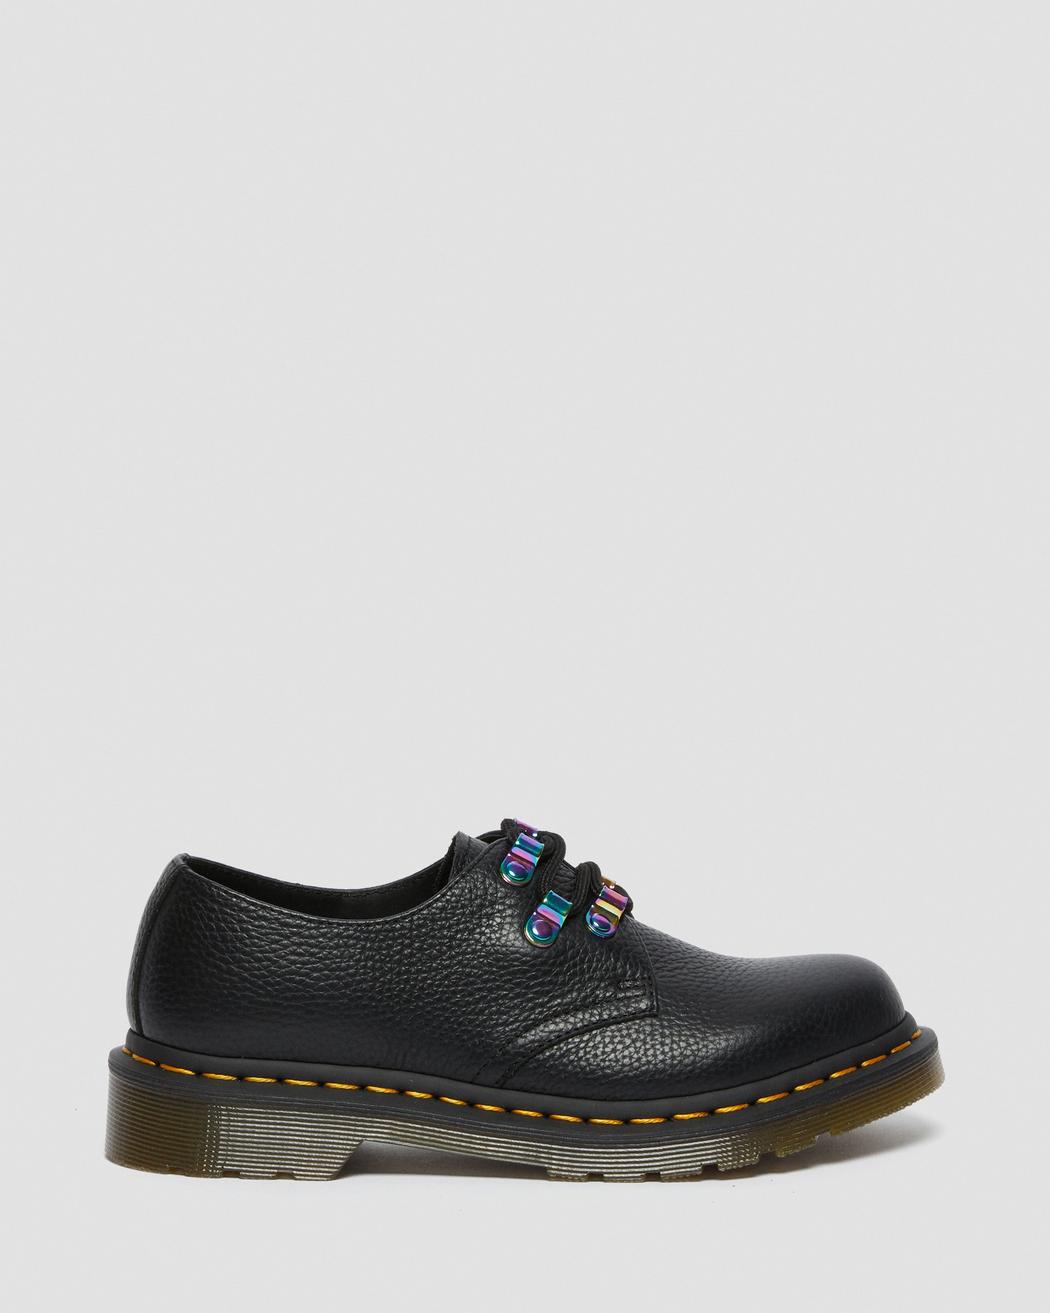 1461 Iridescent Hardware Leather Lace Up Shoes | Dr. Martens